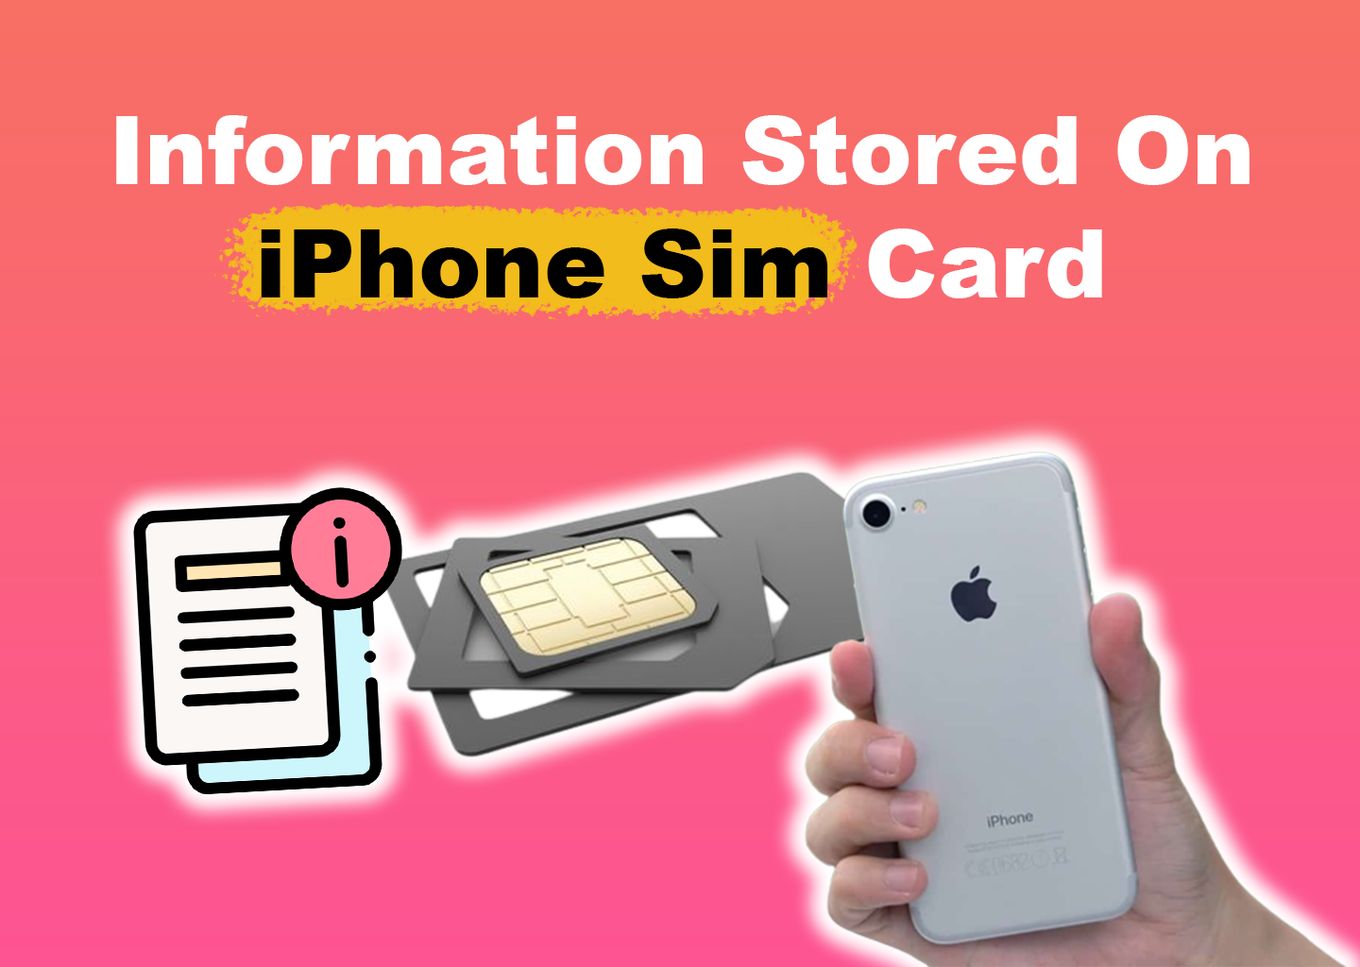 Information Stored on iPhone SIM Card